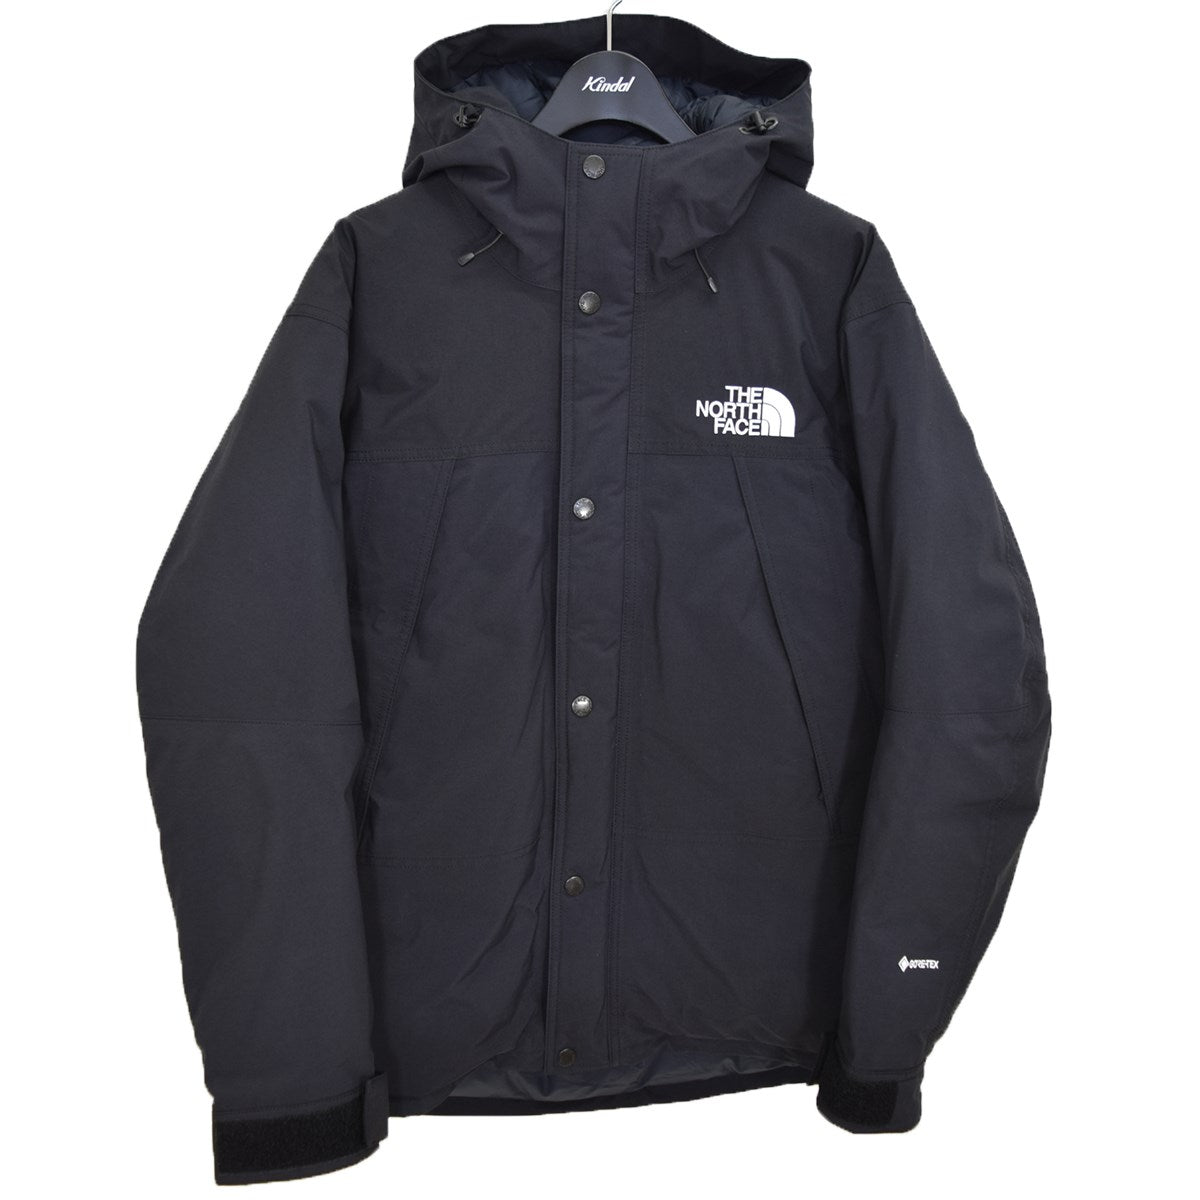 THE NORTH FACE(ザノースフェイス) MOUNTAIN DOWN JACKET マウンテン ...